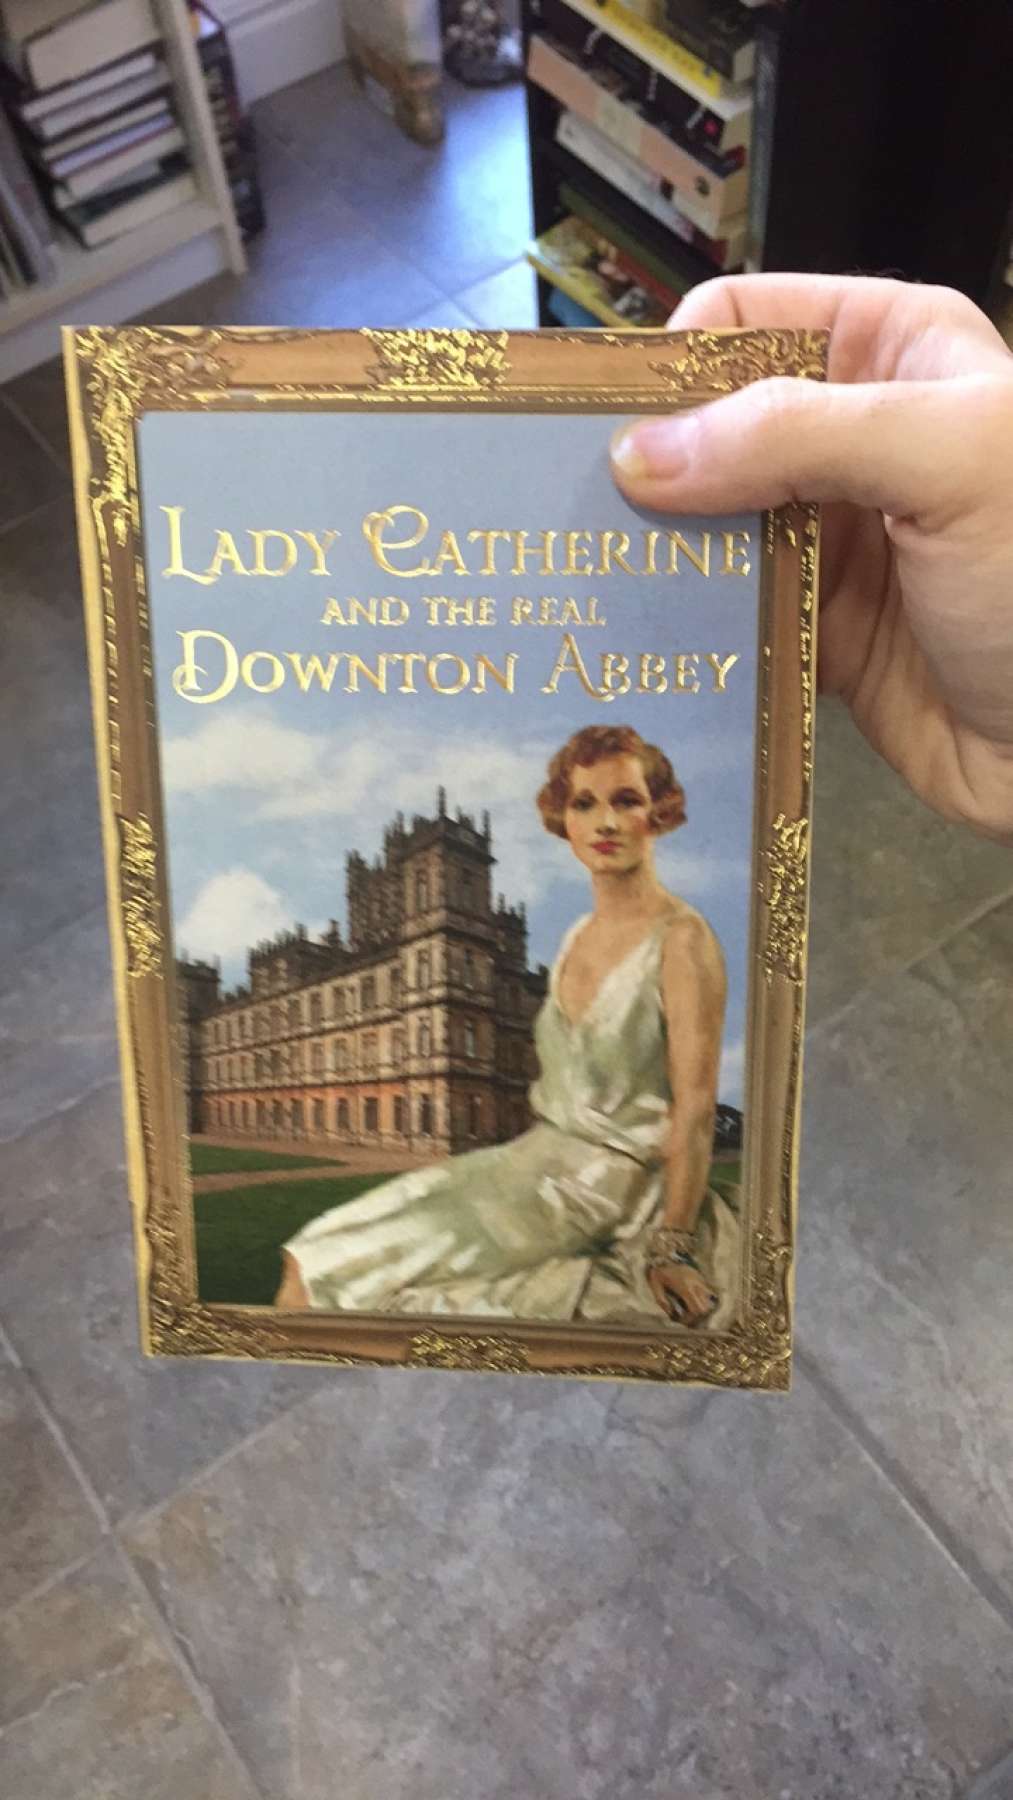 Lady Catherine and the real Downton Abbey